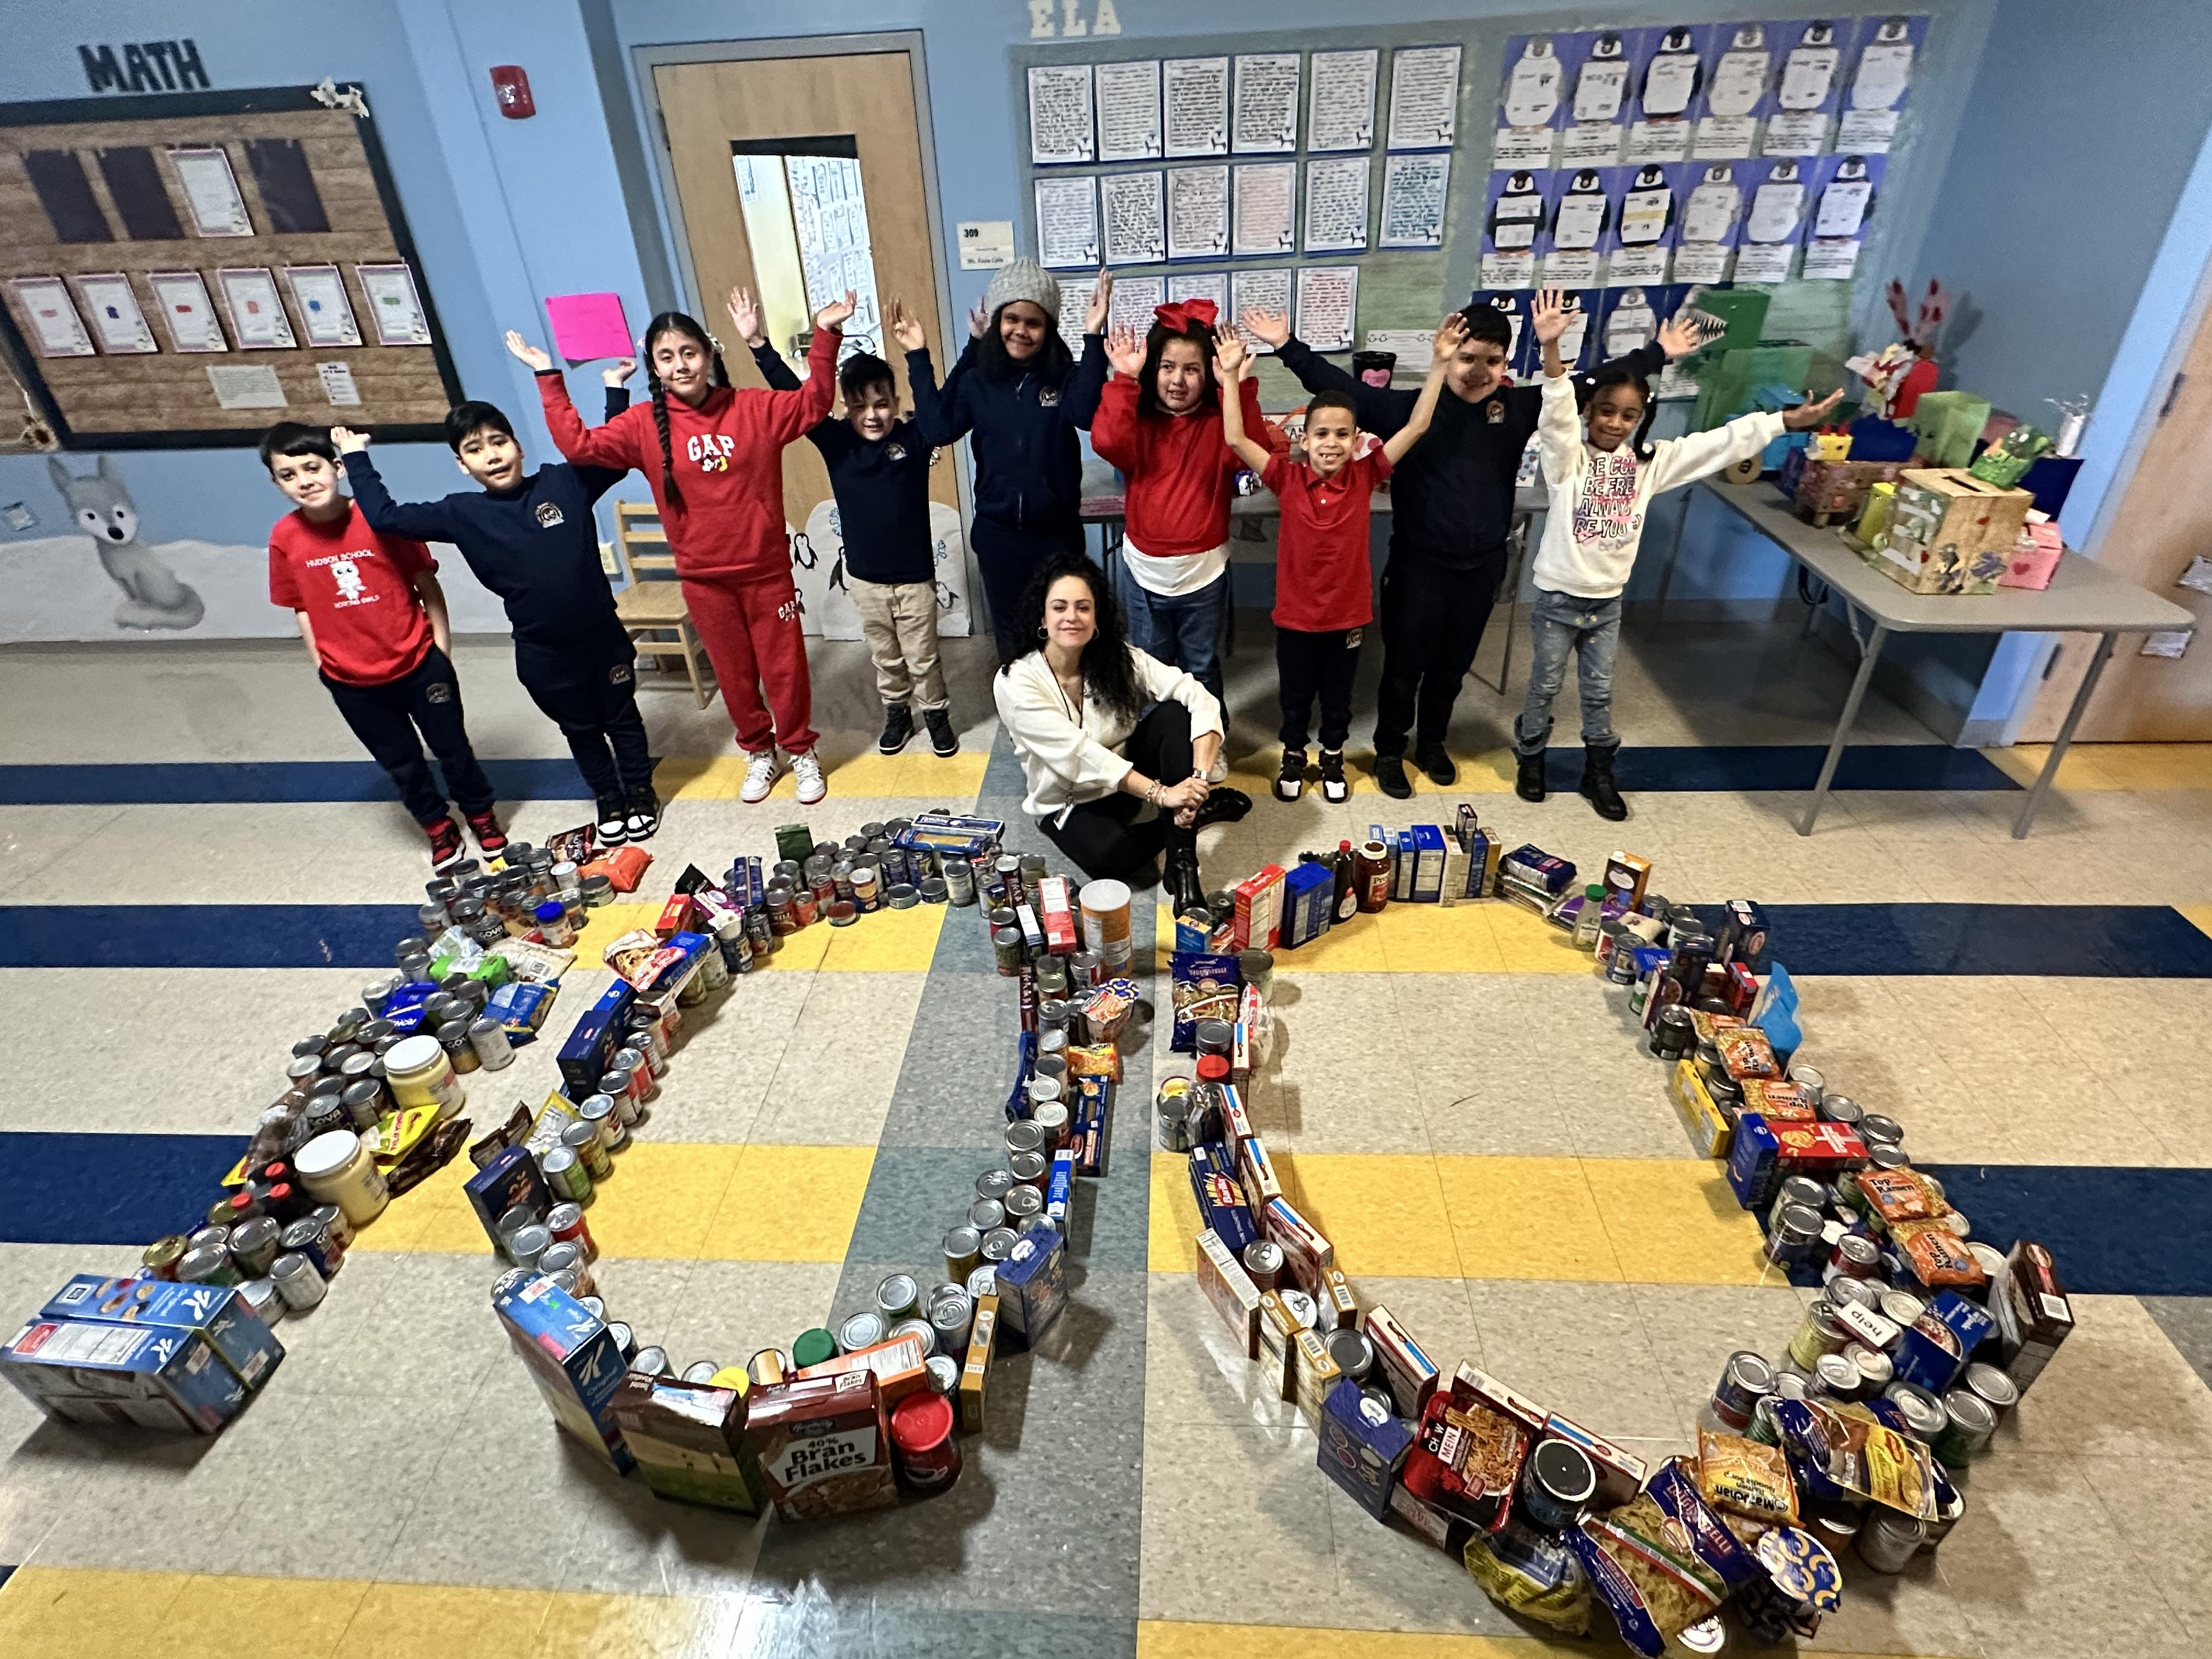 100 Days of Giving at the Hudson School